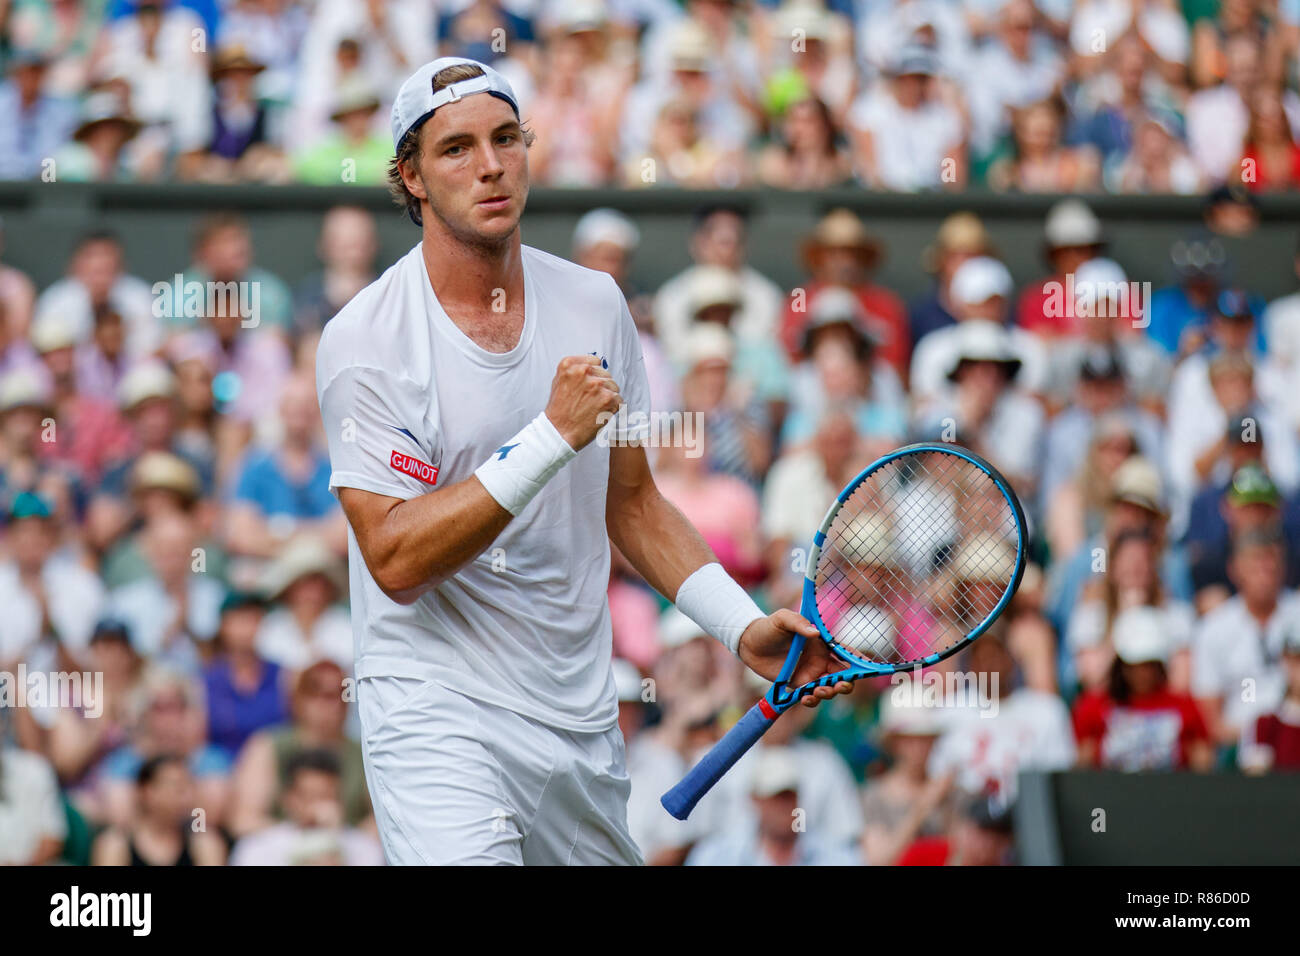 Jan-Lennard Struff of Germany in action during the Wimbledon ...